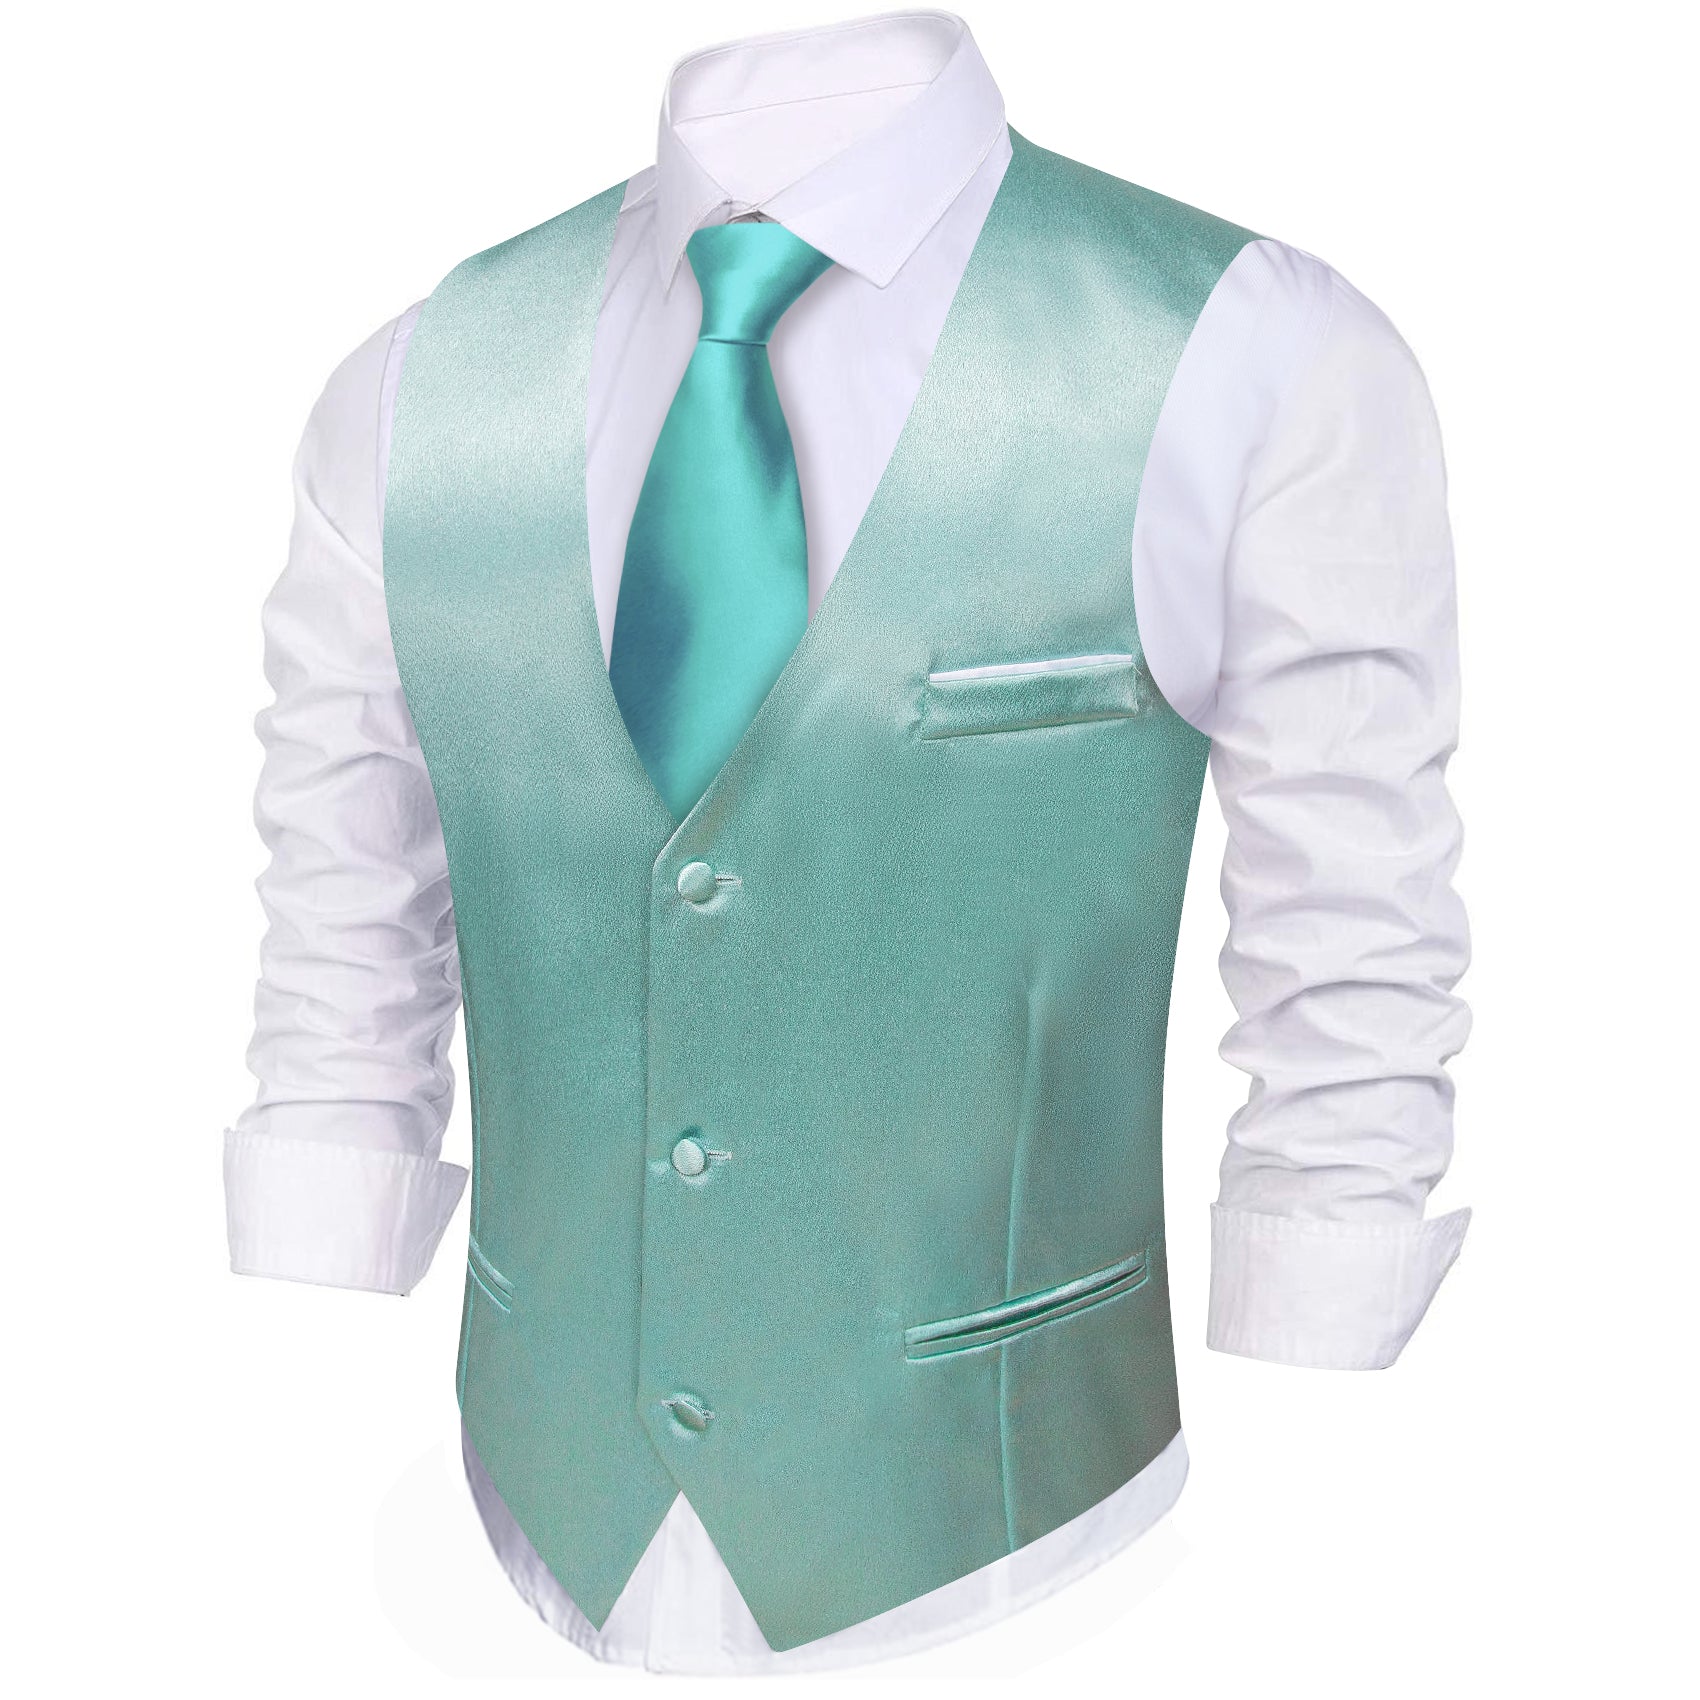 Mist Blue Solid Silk Waistcoat Vest for Party